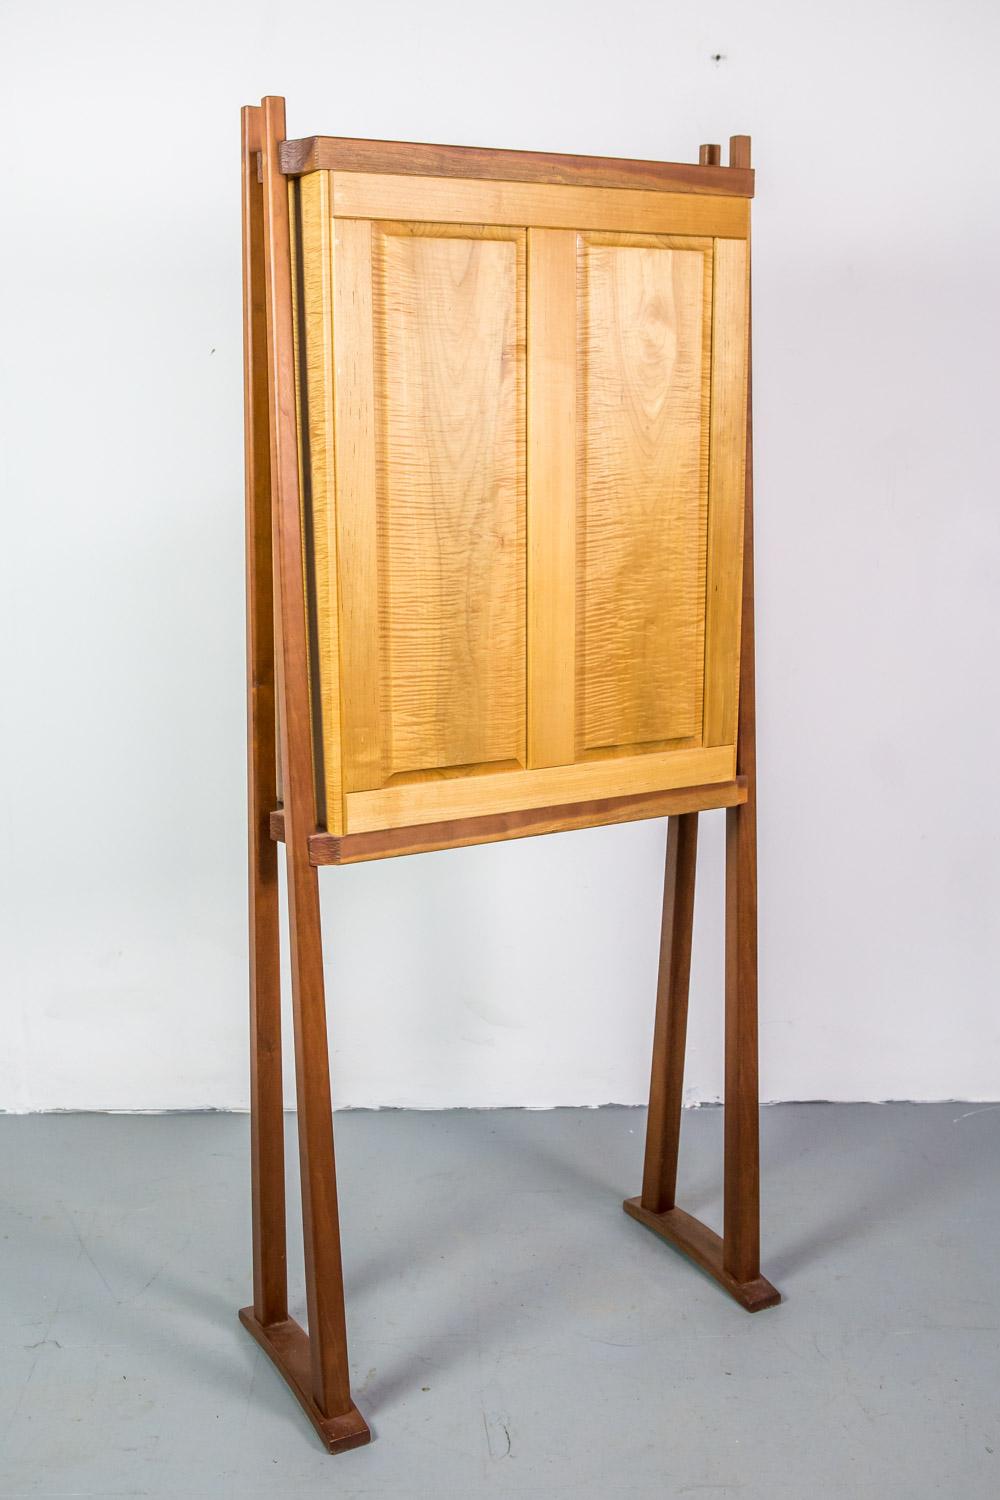 Late 20th Century Studio Cabinet in Wood by American Craftsman Mike Bartell For Sale